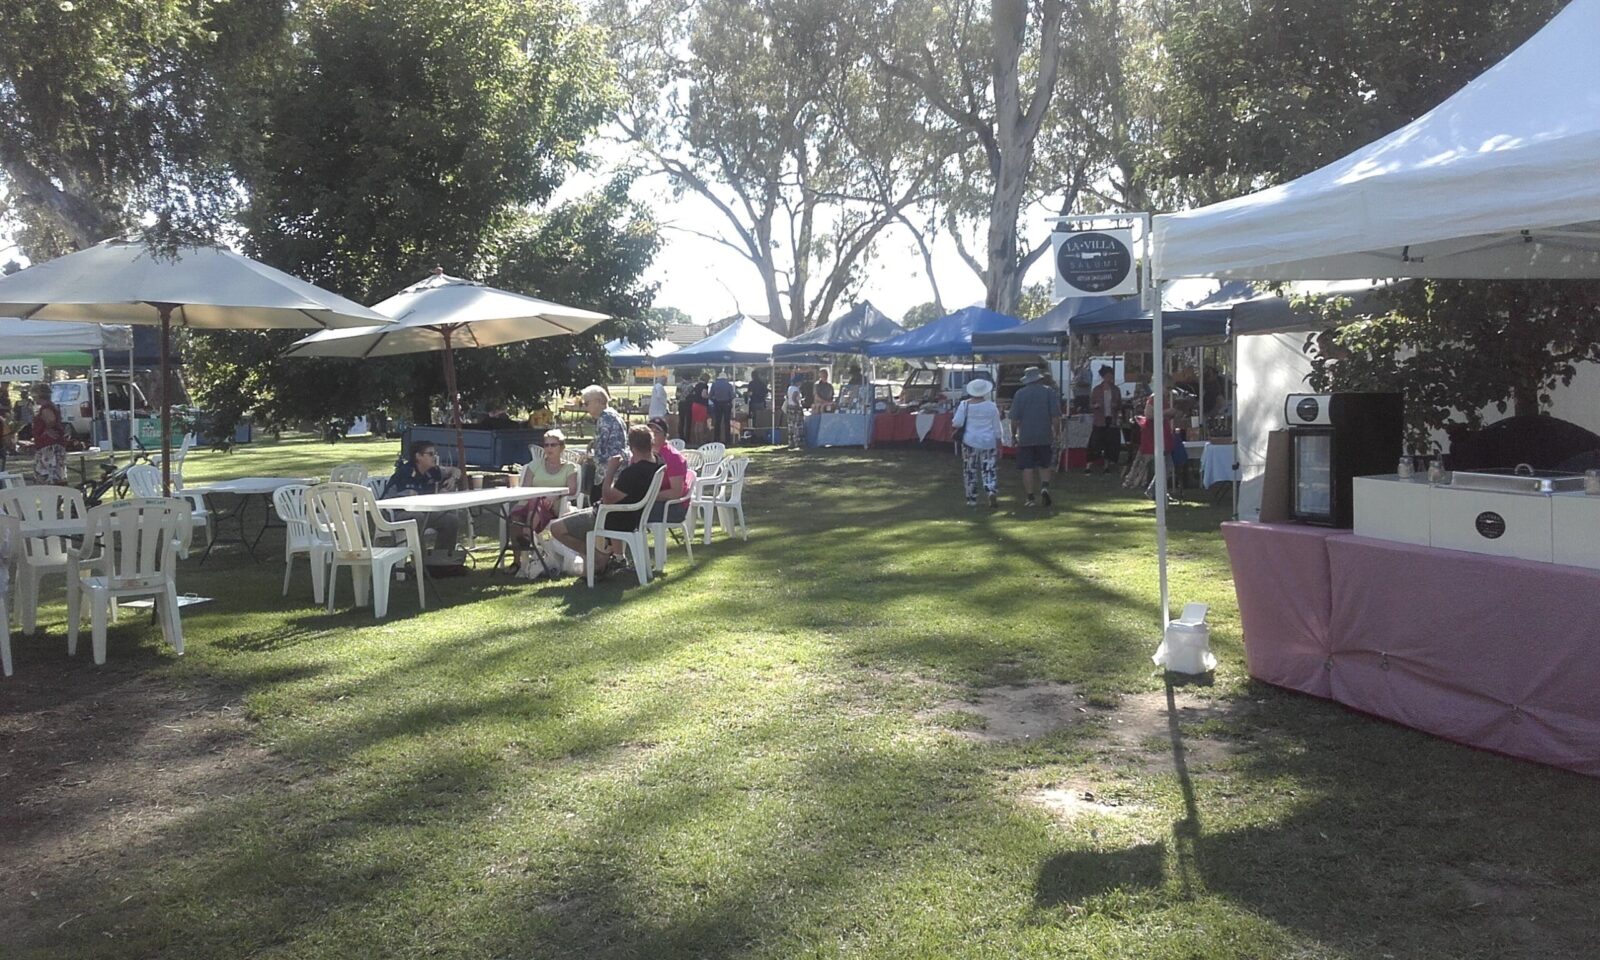 Sunshine over the market in Rotary Park